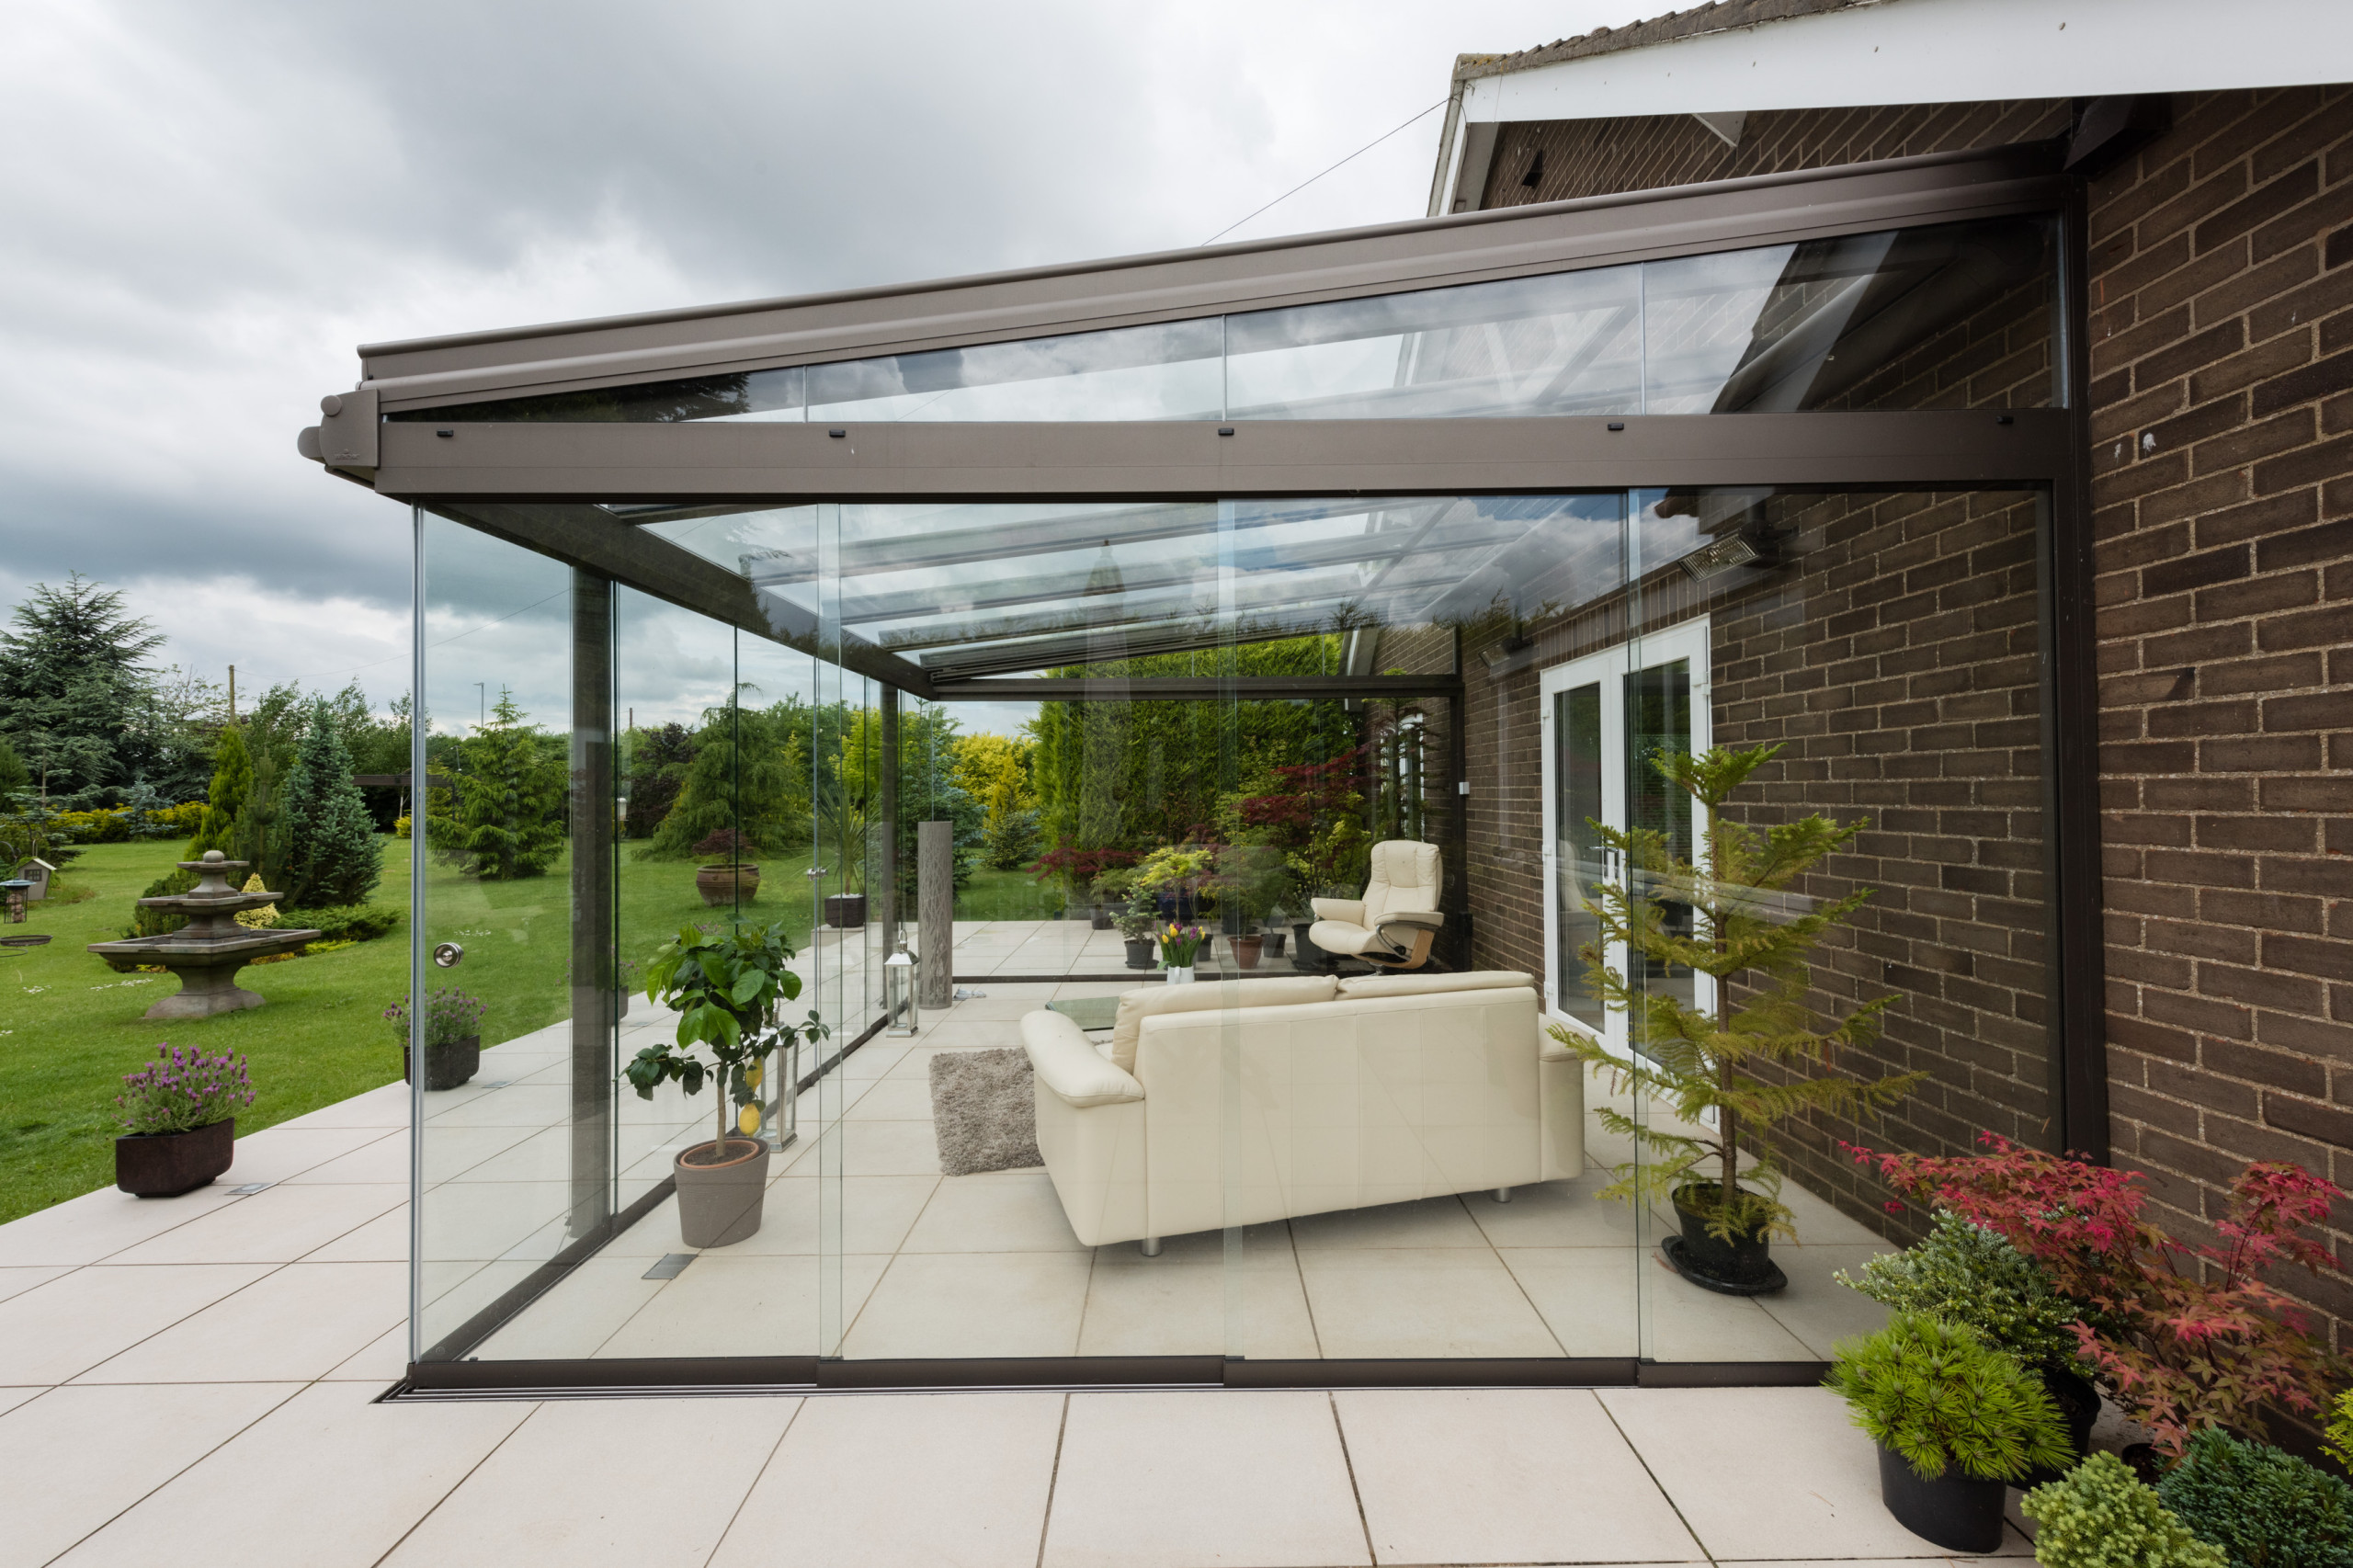 Glass Rooms, Annexes & Awnings - contemporary design, unique to your needs  - Contemporary - Sunroom - Other - by QKS Limited | Houzz